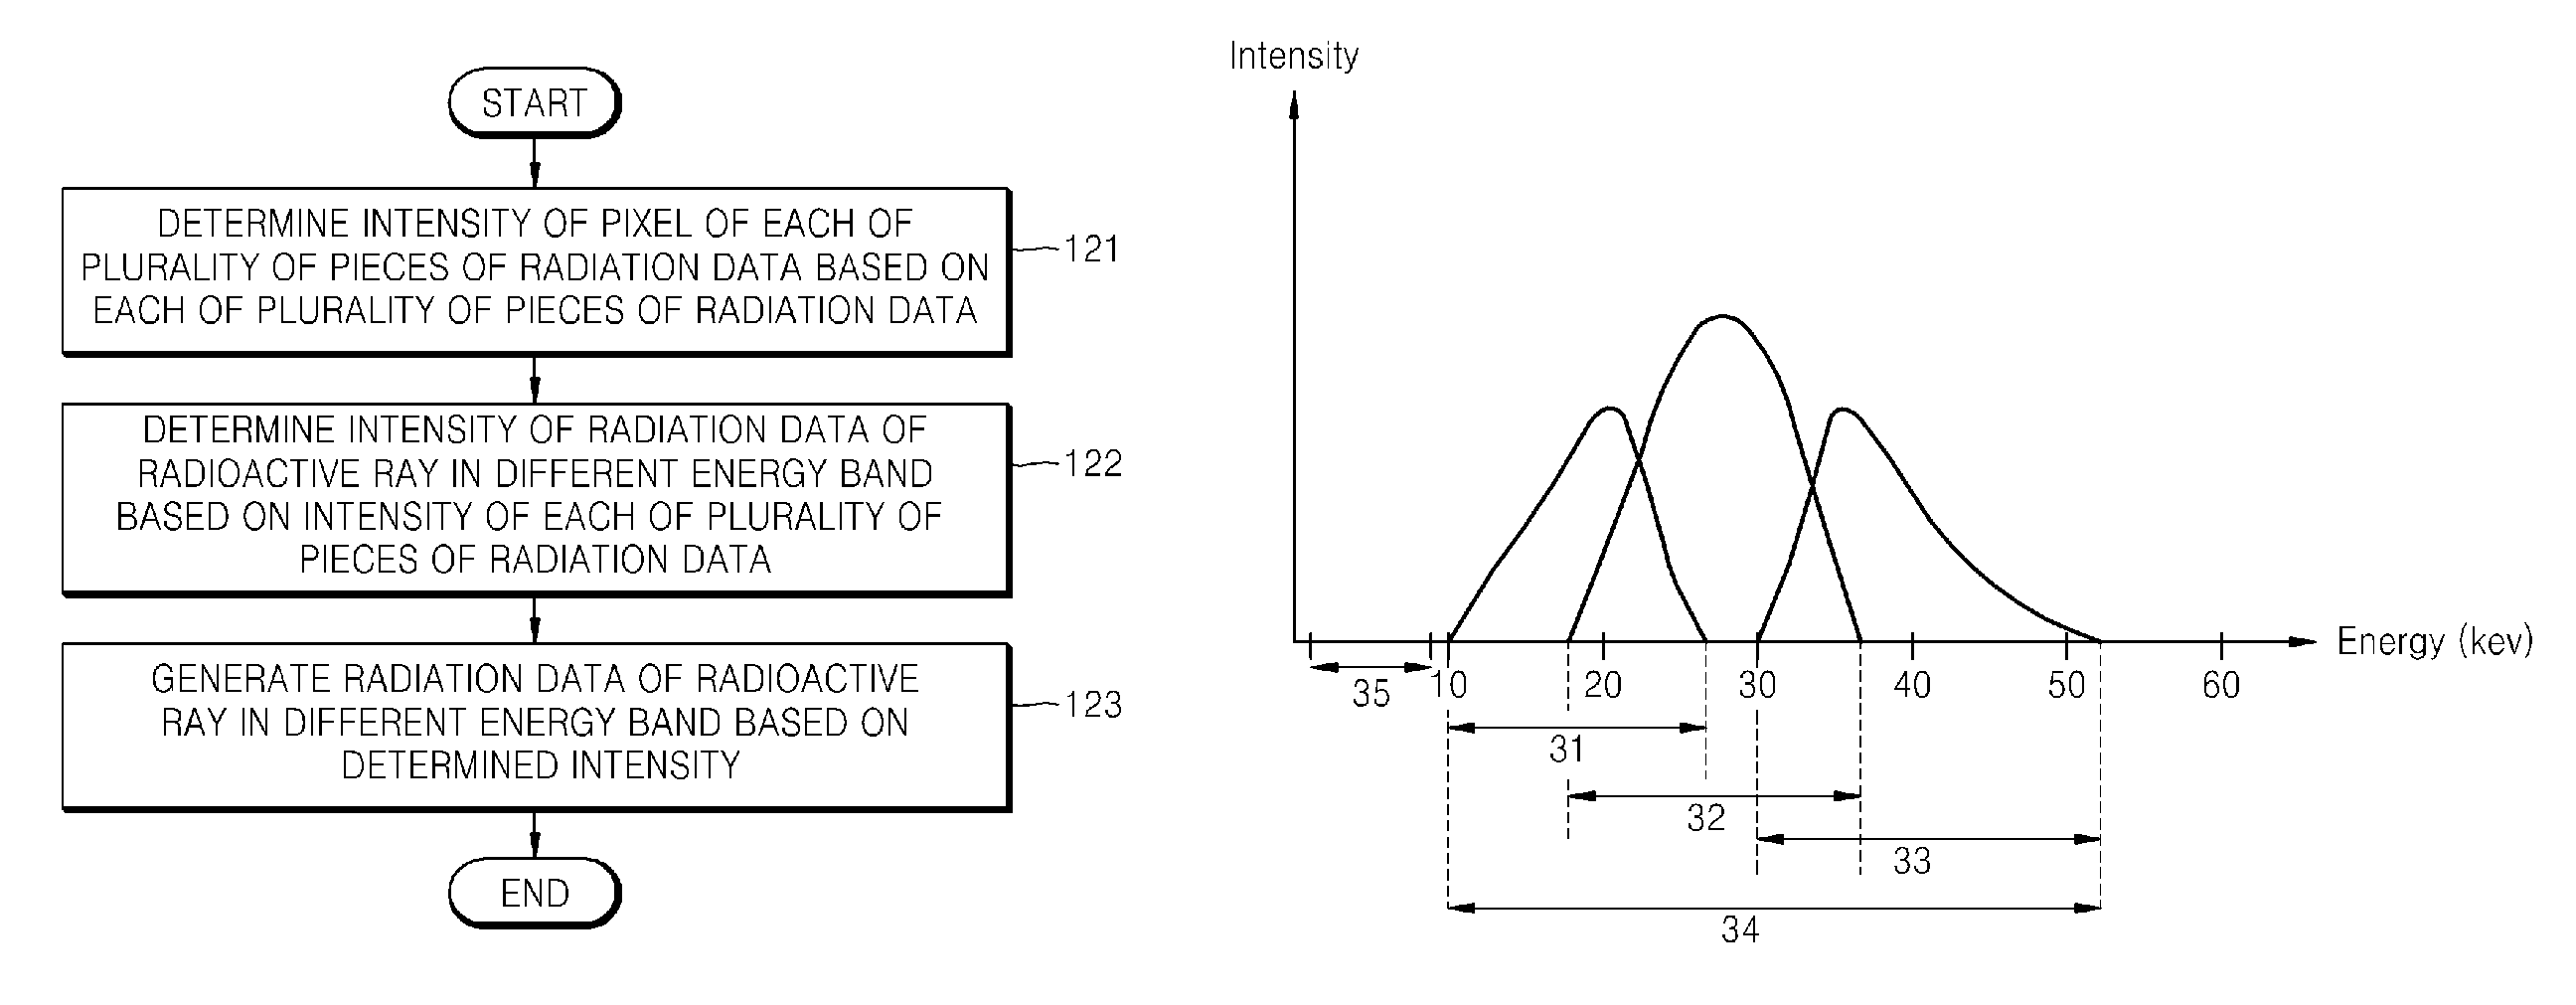 Method of generating image by using multi-energy radiation data and apparatus therefor